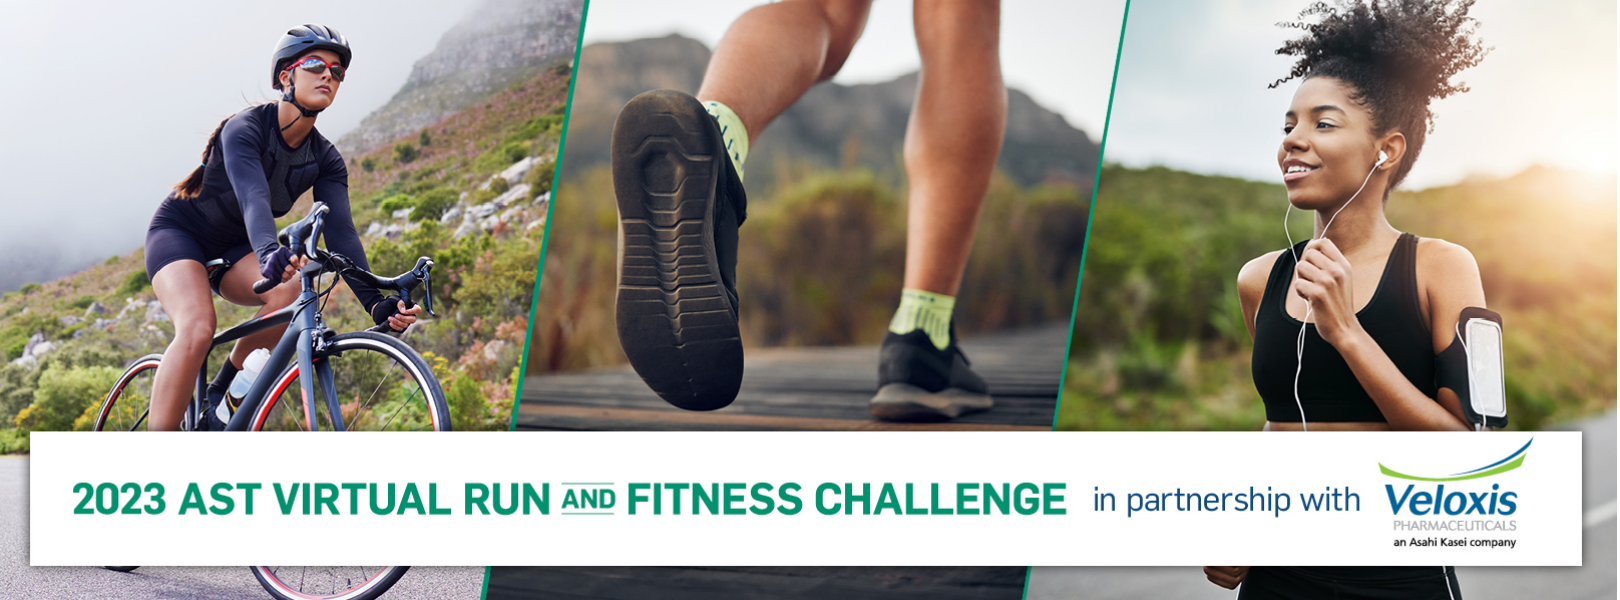 2023 AST Virtual Run and Fitness Challenge